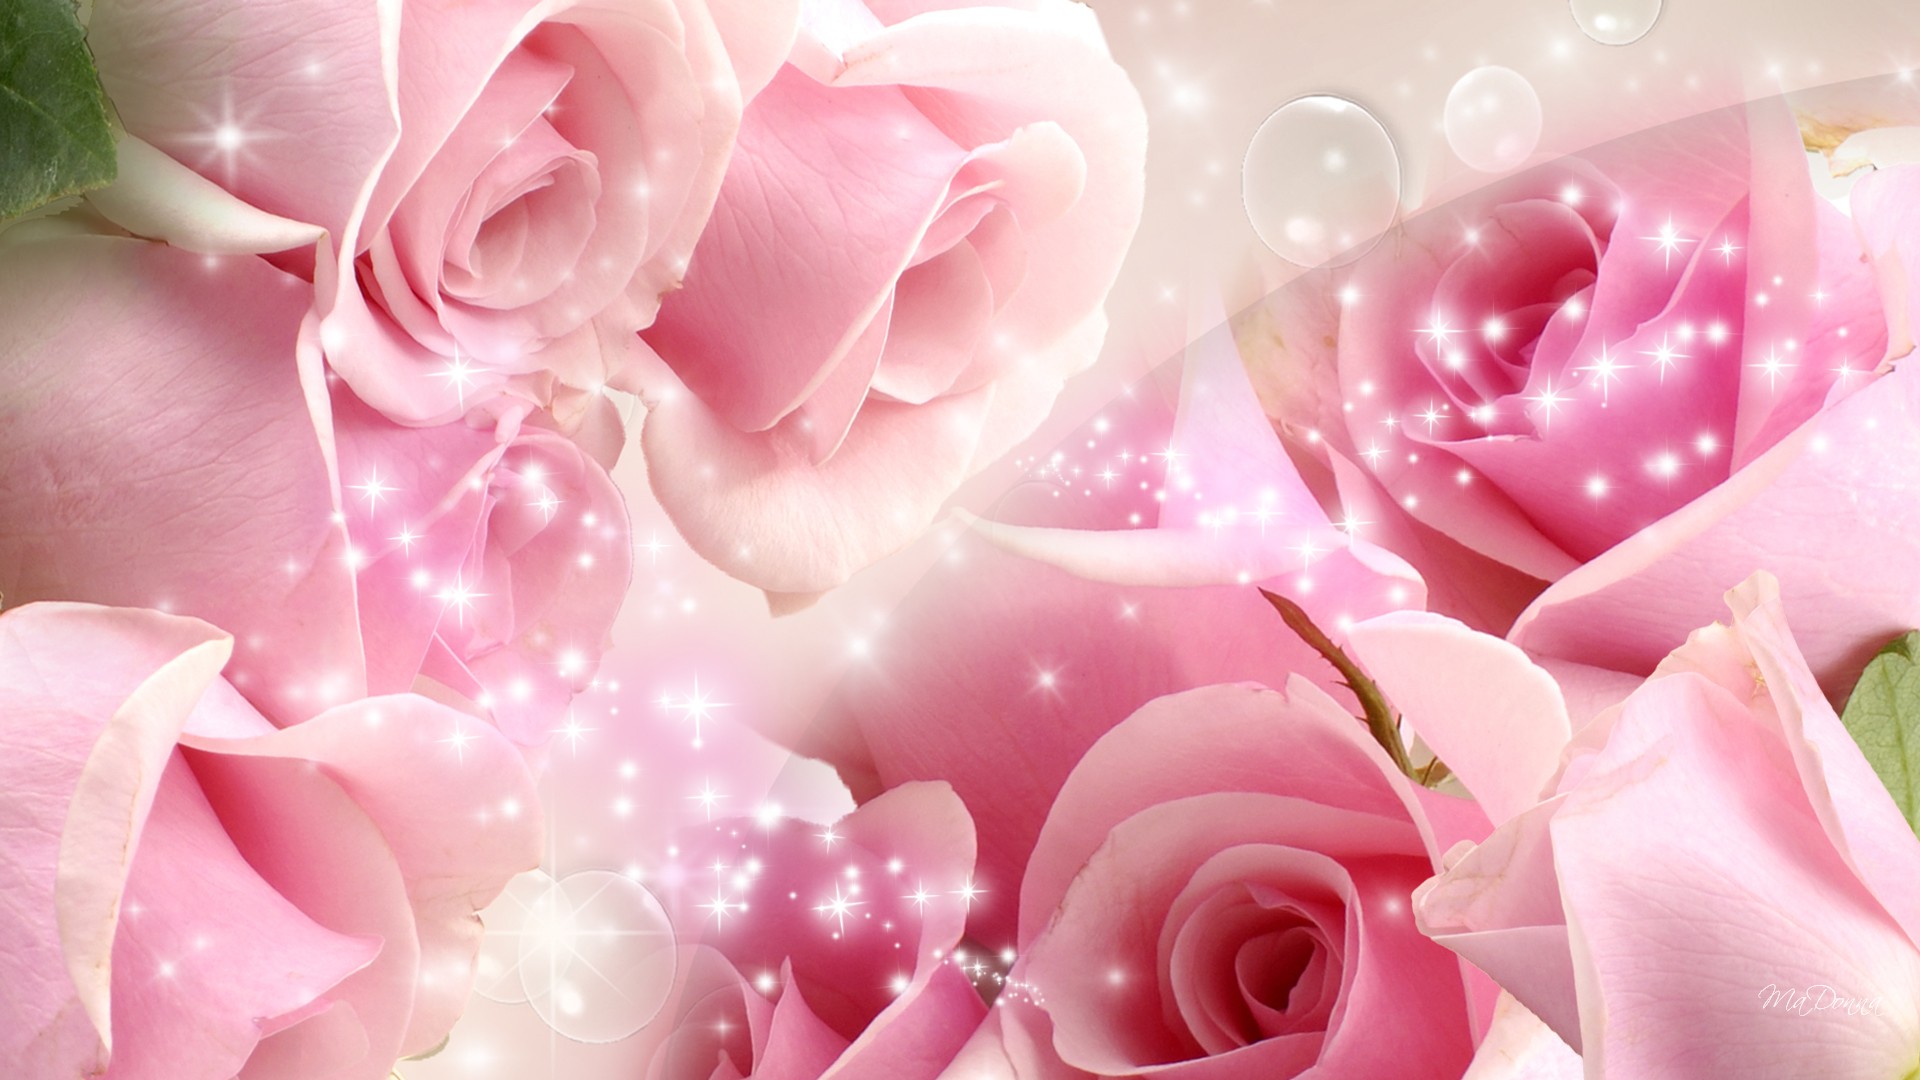 Flowers Cool Pink Rose wallpapers (Desktop, Phone, Tablet) - Awesome ...